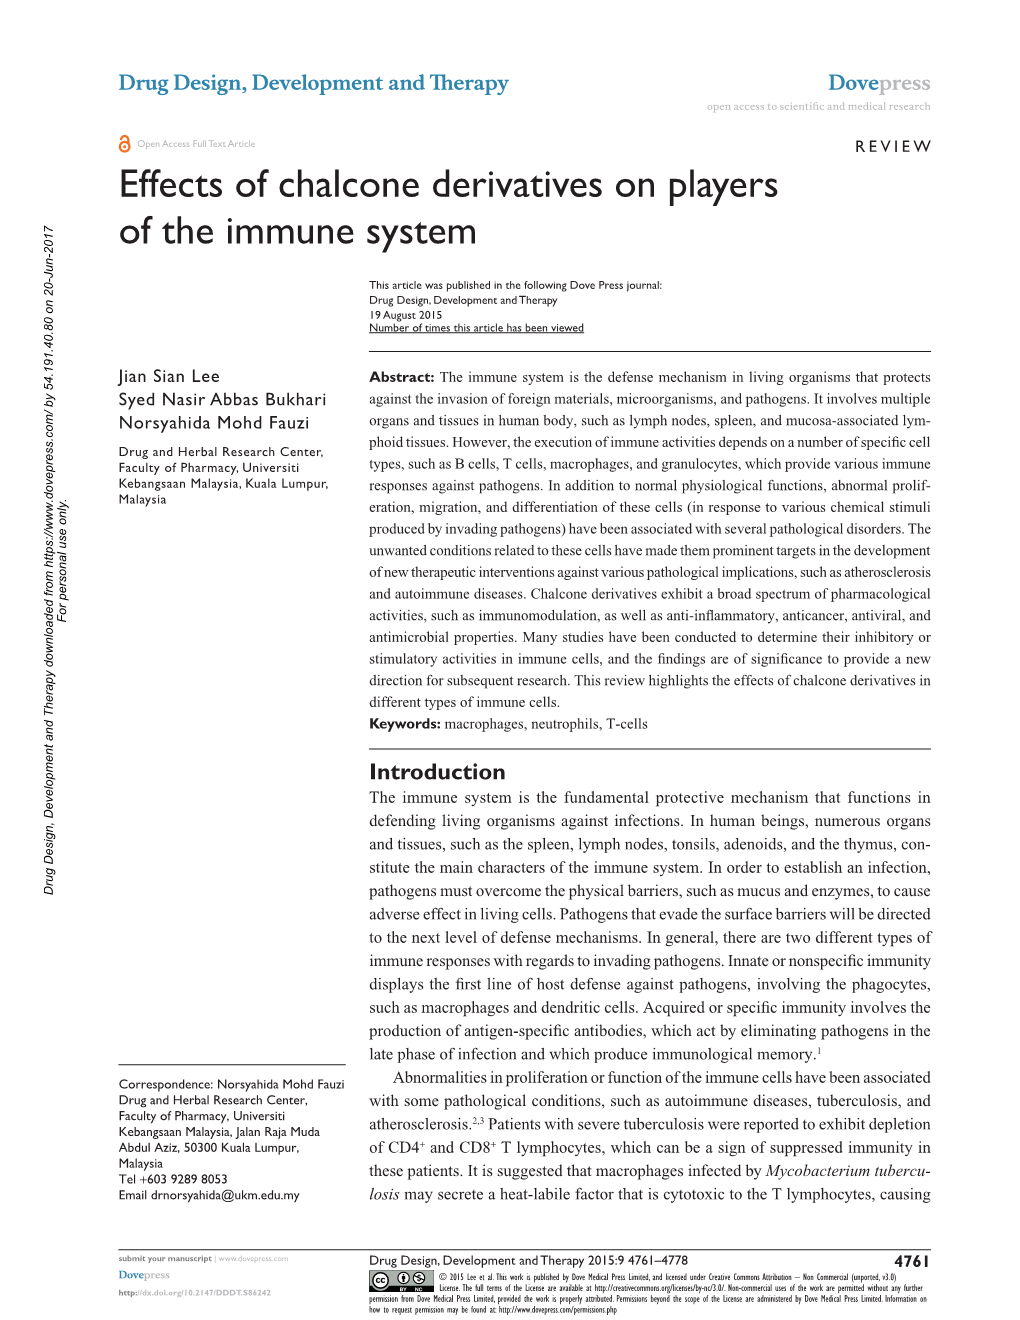 Effects of Chalcone Derivatives on Players of the Immune System